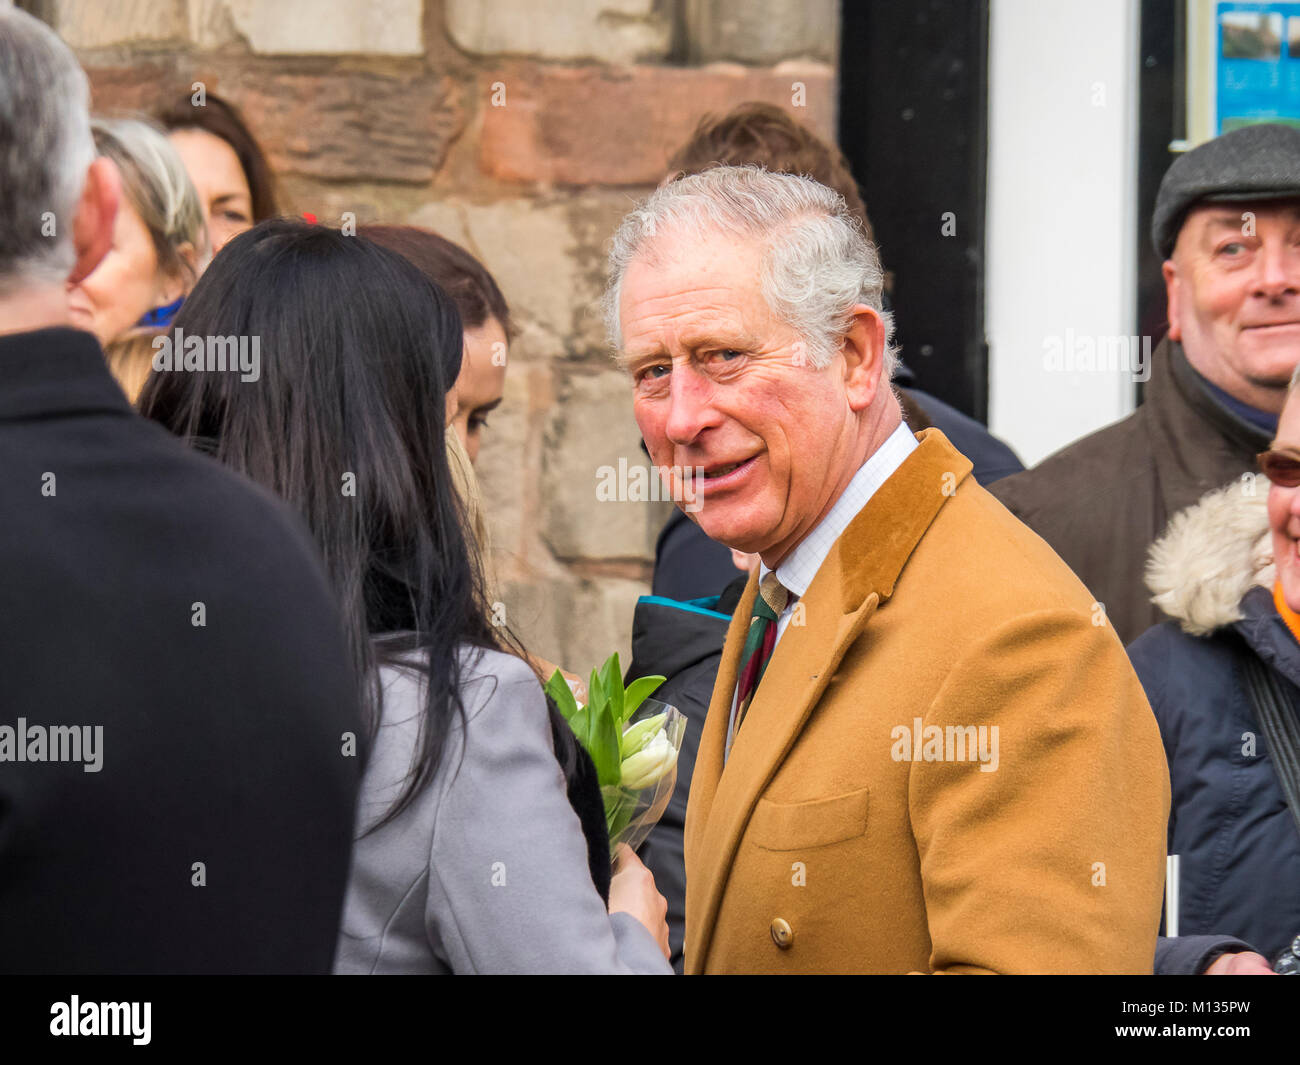 Prince Charles prince of Wales, meeting people of Congleton, Cheshire 24/1/18 Stock Photo